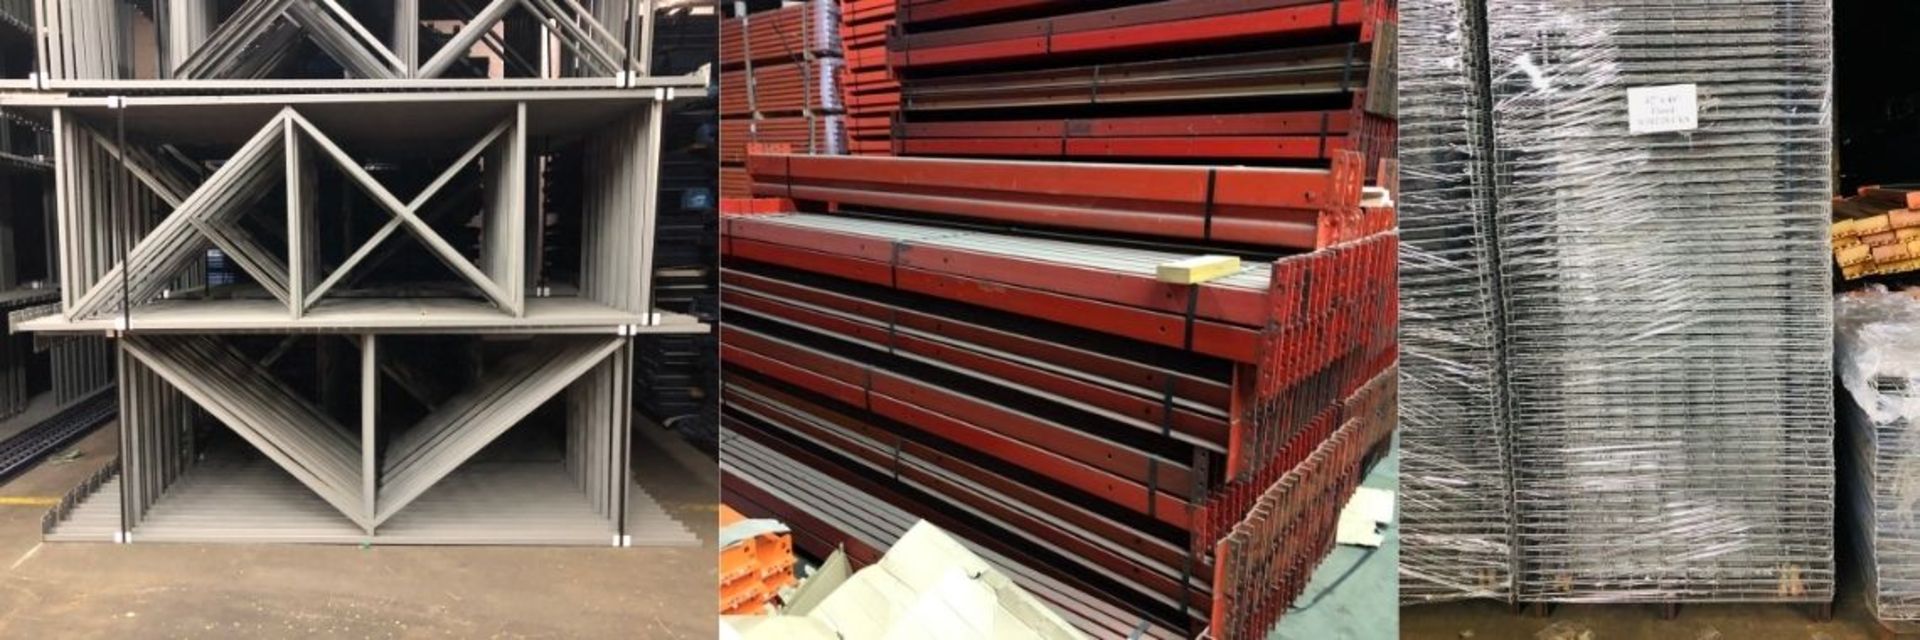 14 BAYS OF 10.5'H X 42"D X 102"L STRUCTURAL STYLE PALLET RACKS - Image 3 of 5